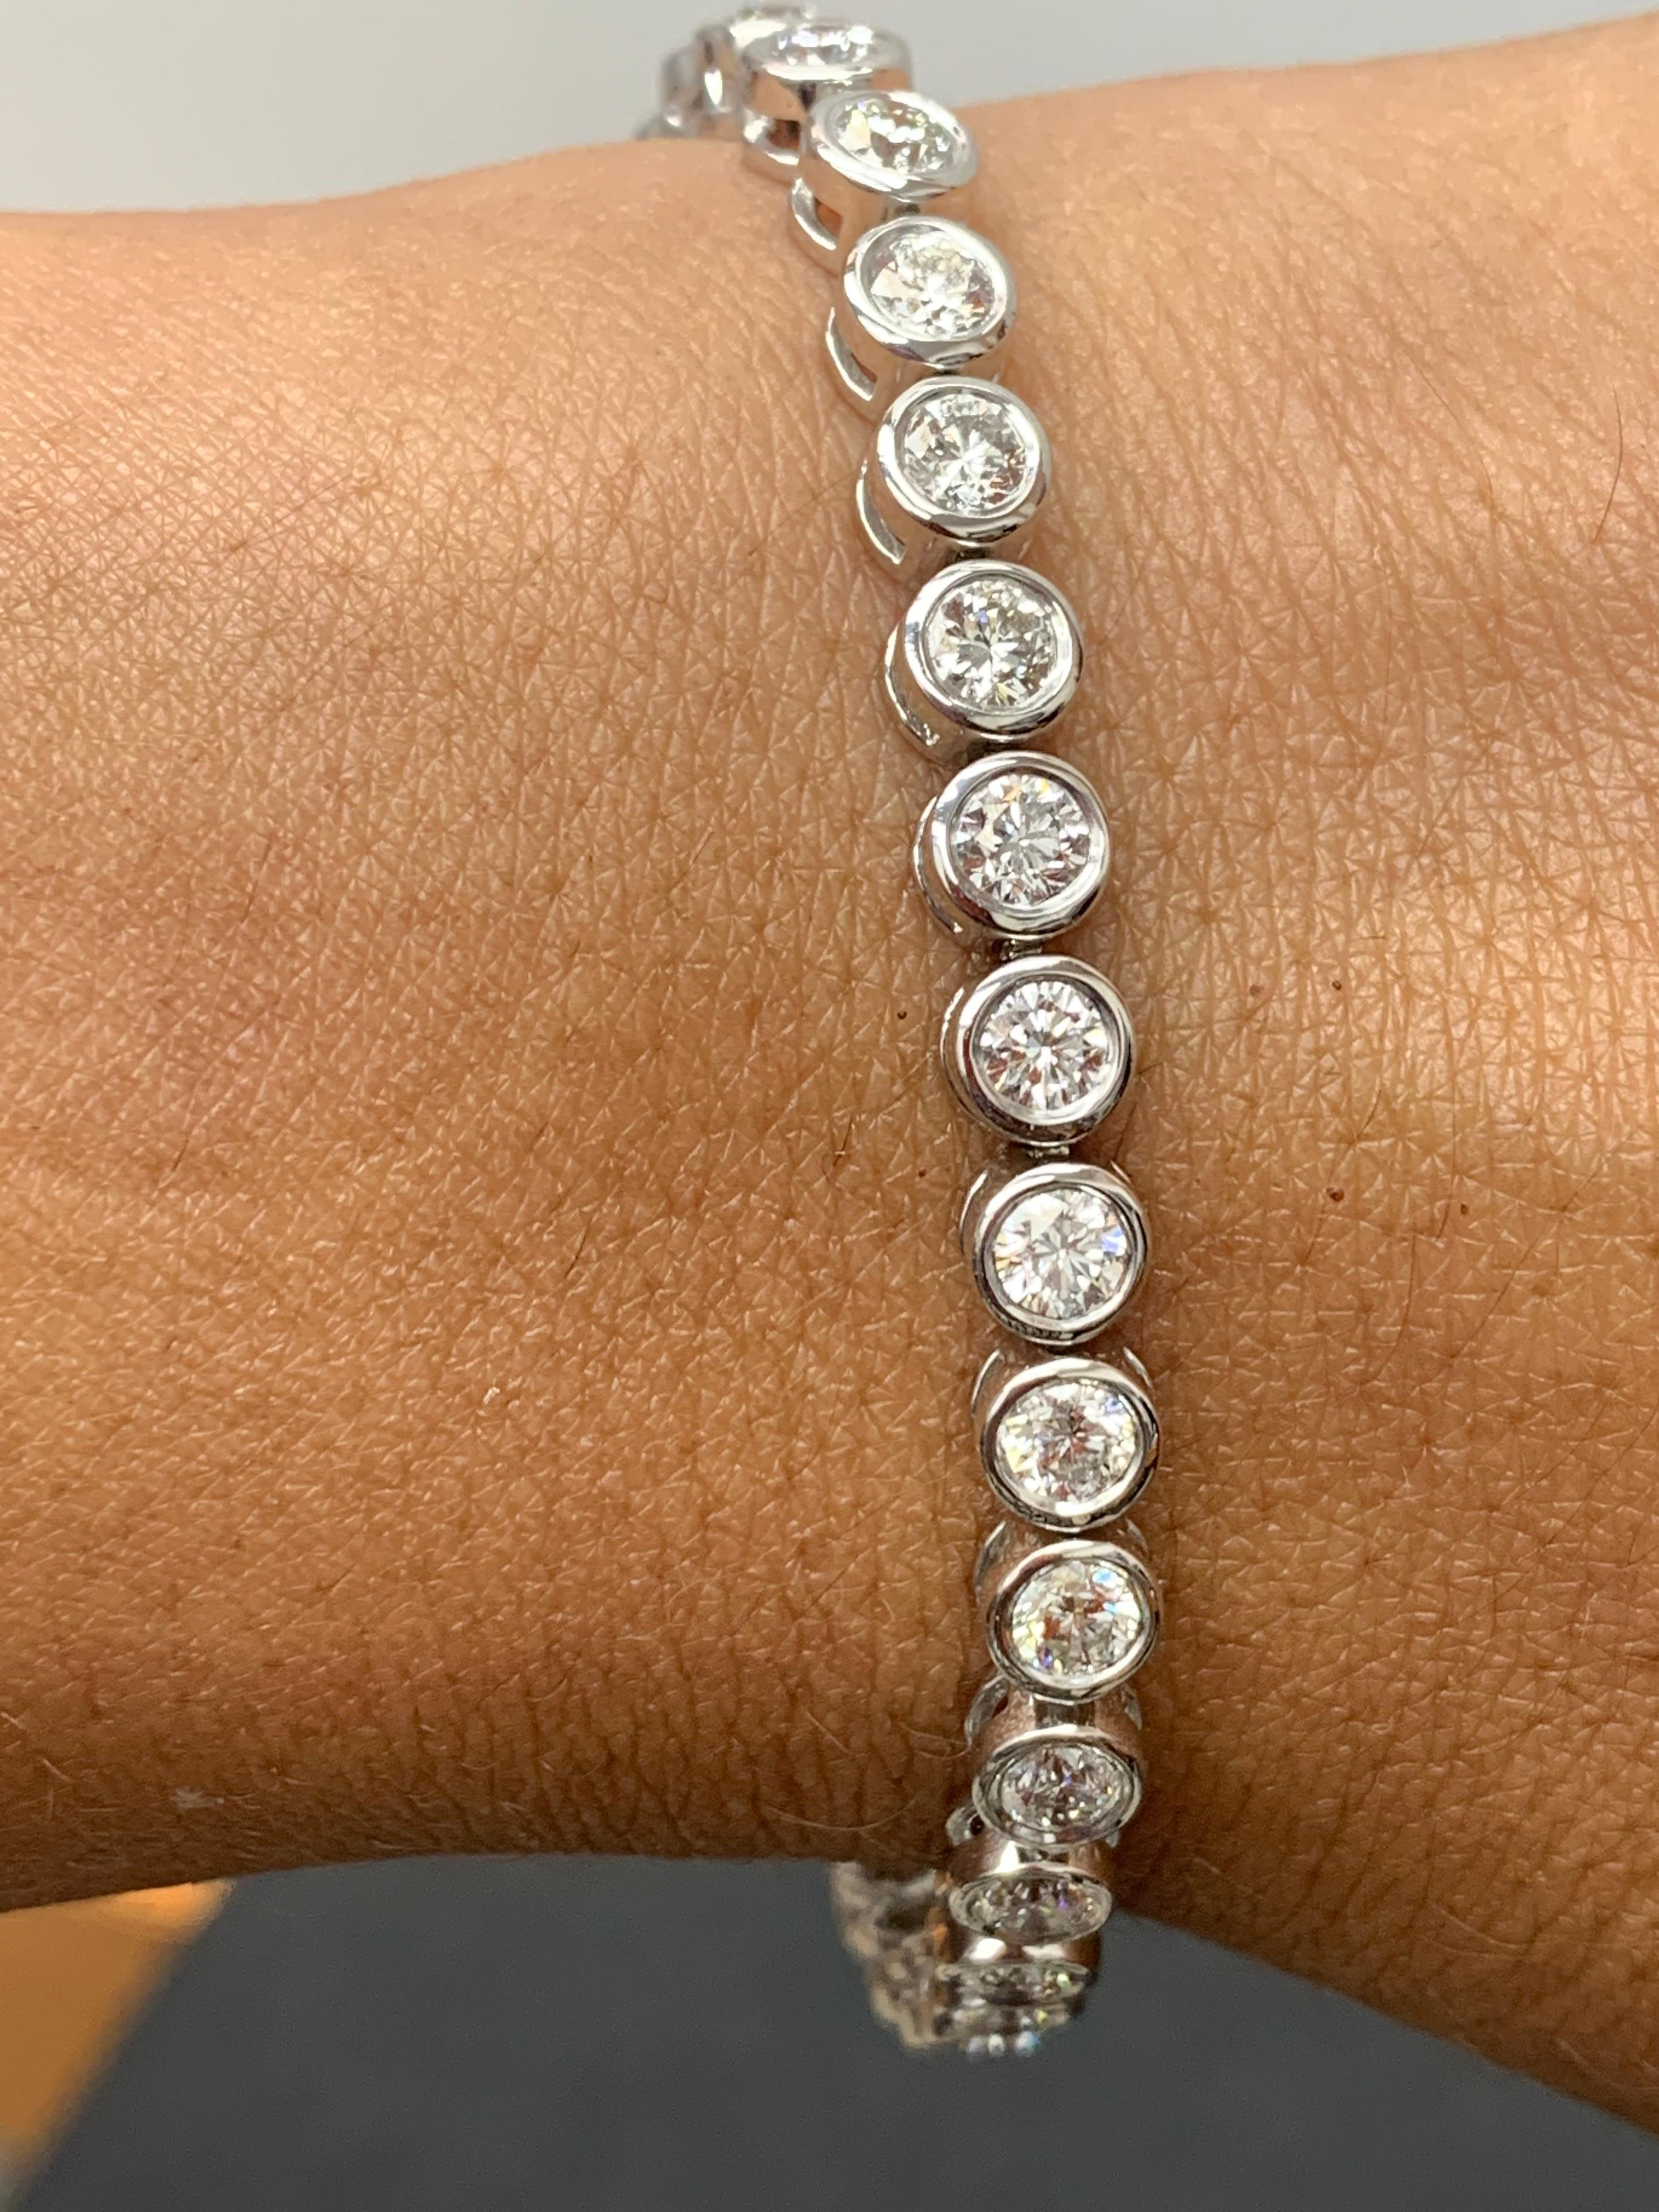 A versatile and timeless tennis bracelet showcasing a row of round brilliant diamonds weighing 5.07 carats total, set in Bezel setting in 14k white gold. 

All diamonds are GH color SI1 Clarity.
Style is available in different price ranges. Prices